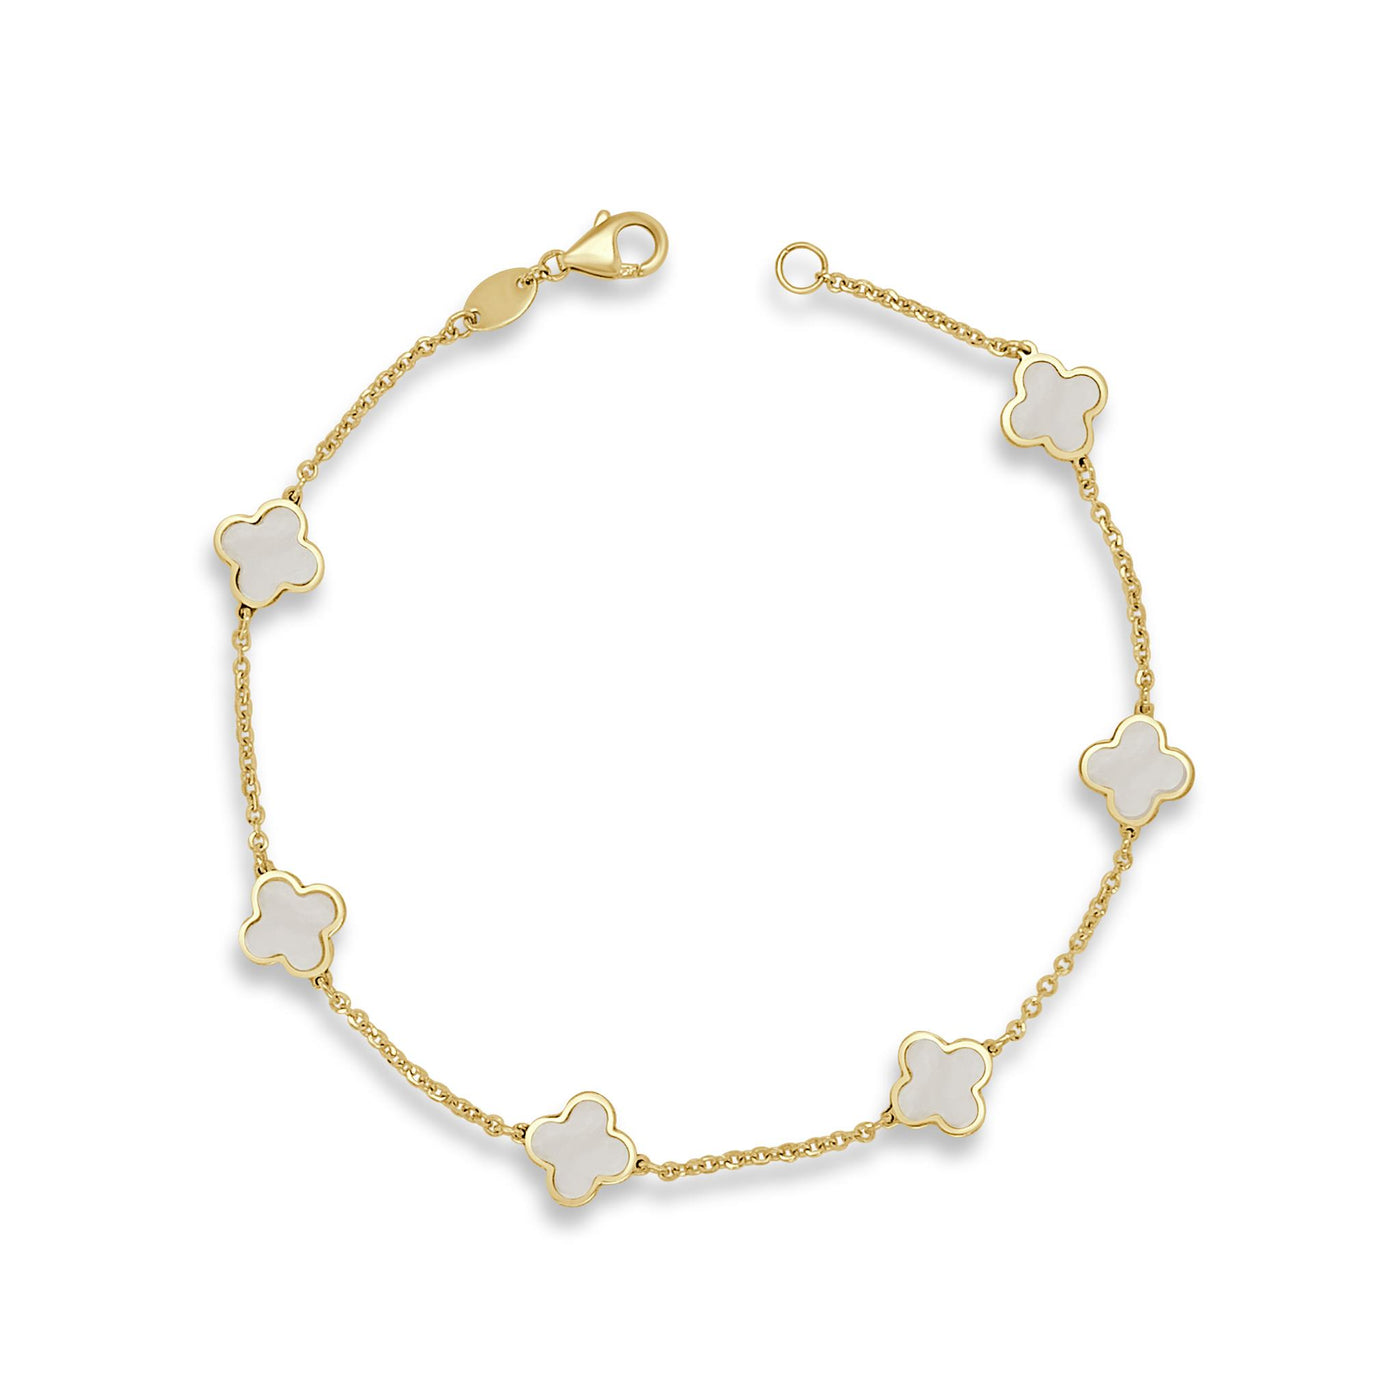 14K Yellow Gold 7" Clover Station Style Bracelet Featuring Mother Of Pearls